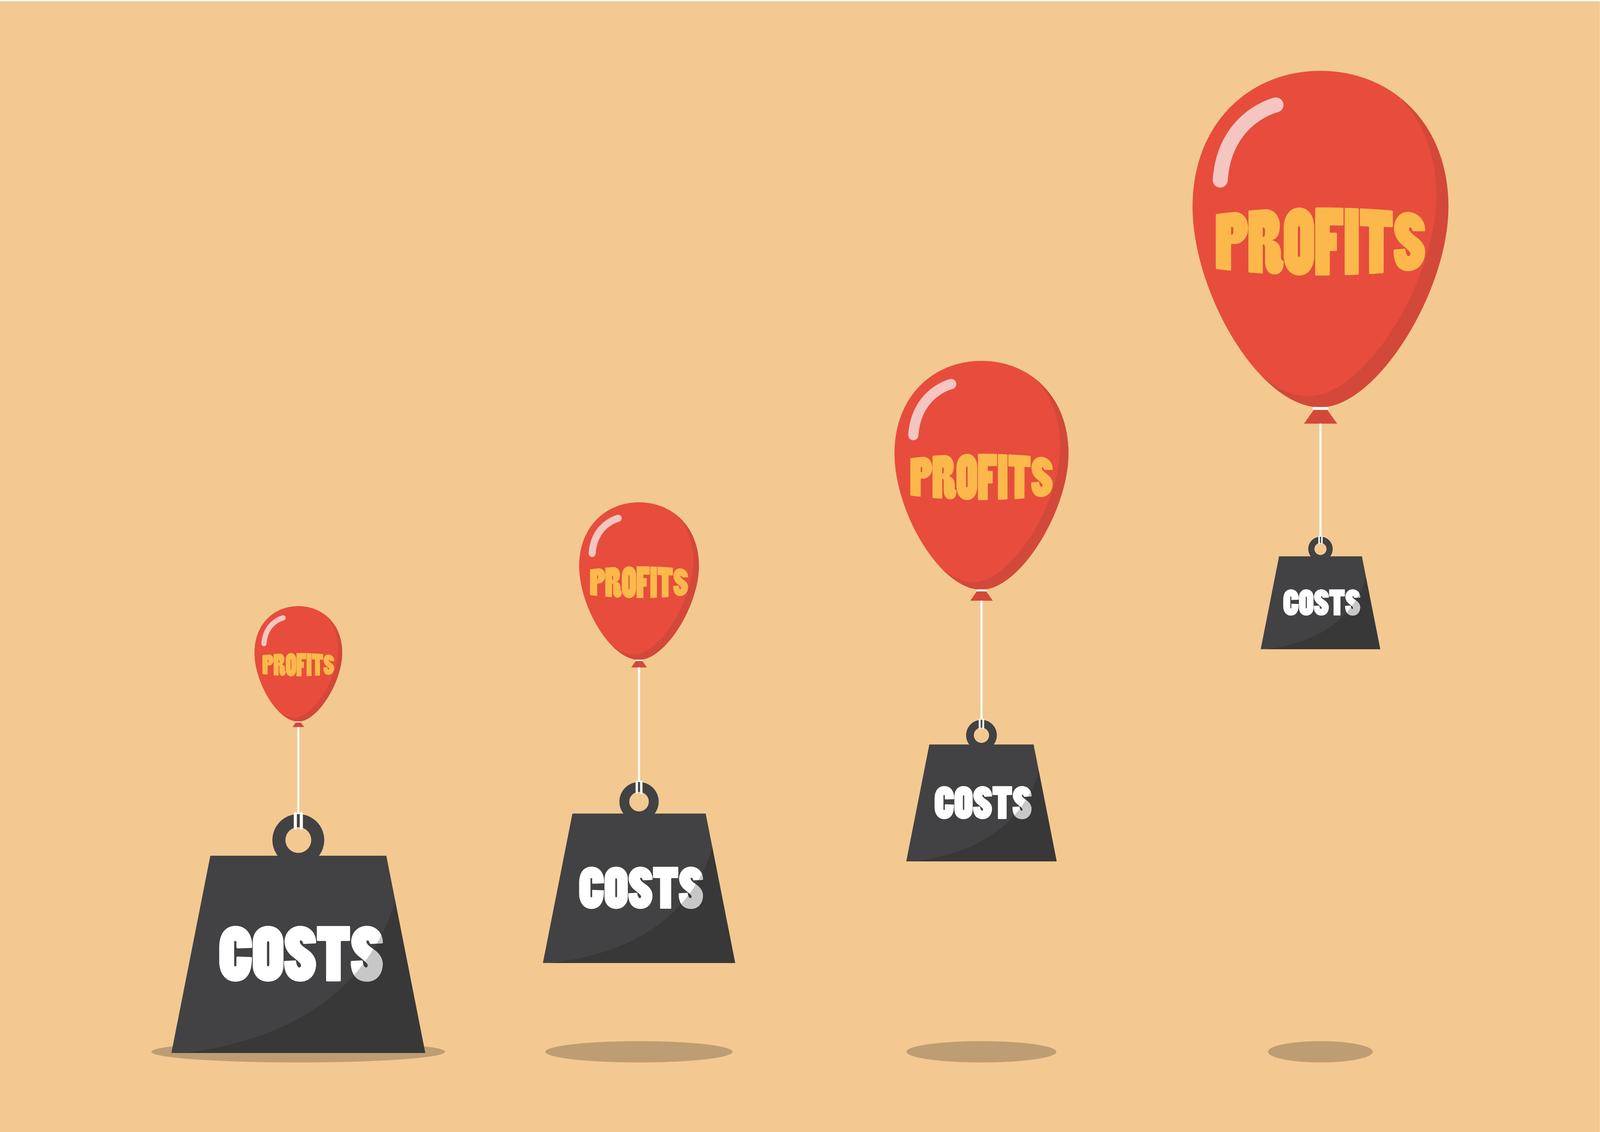 Profits and costs business metaphor by siraanamwong